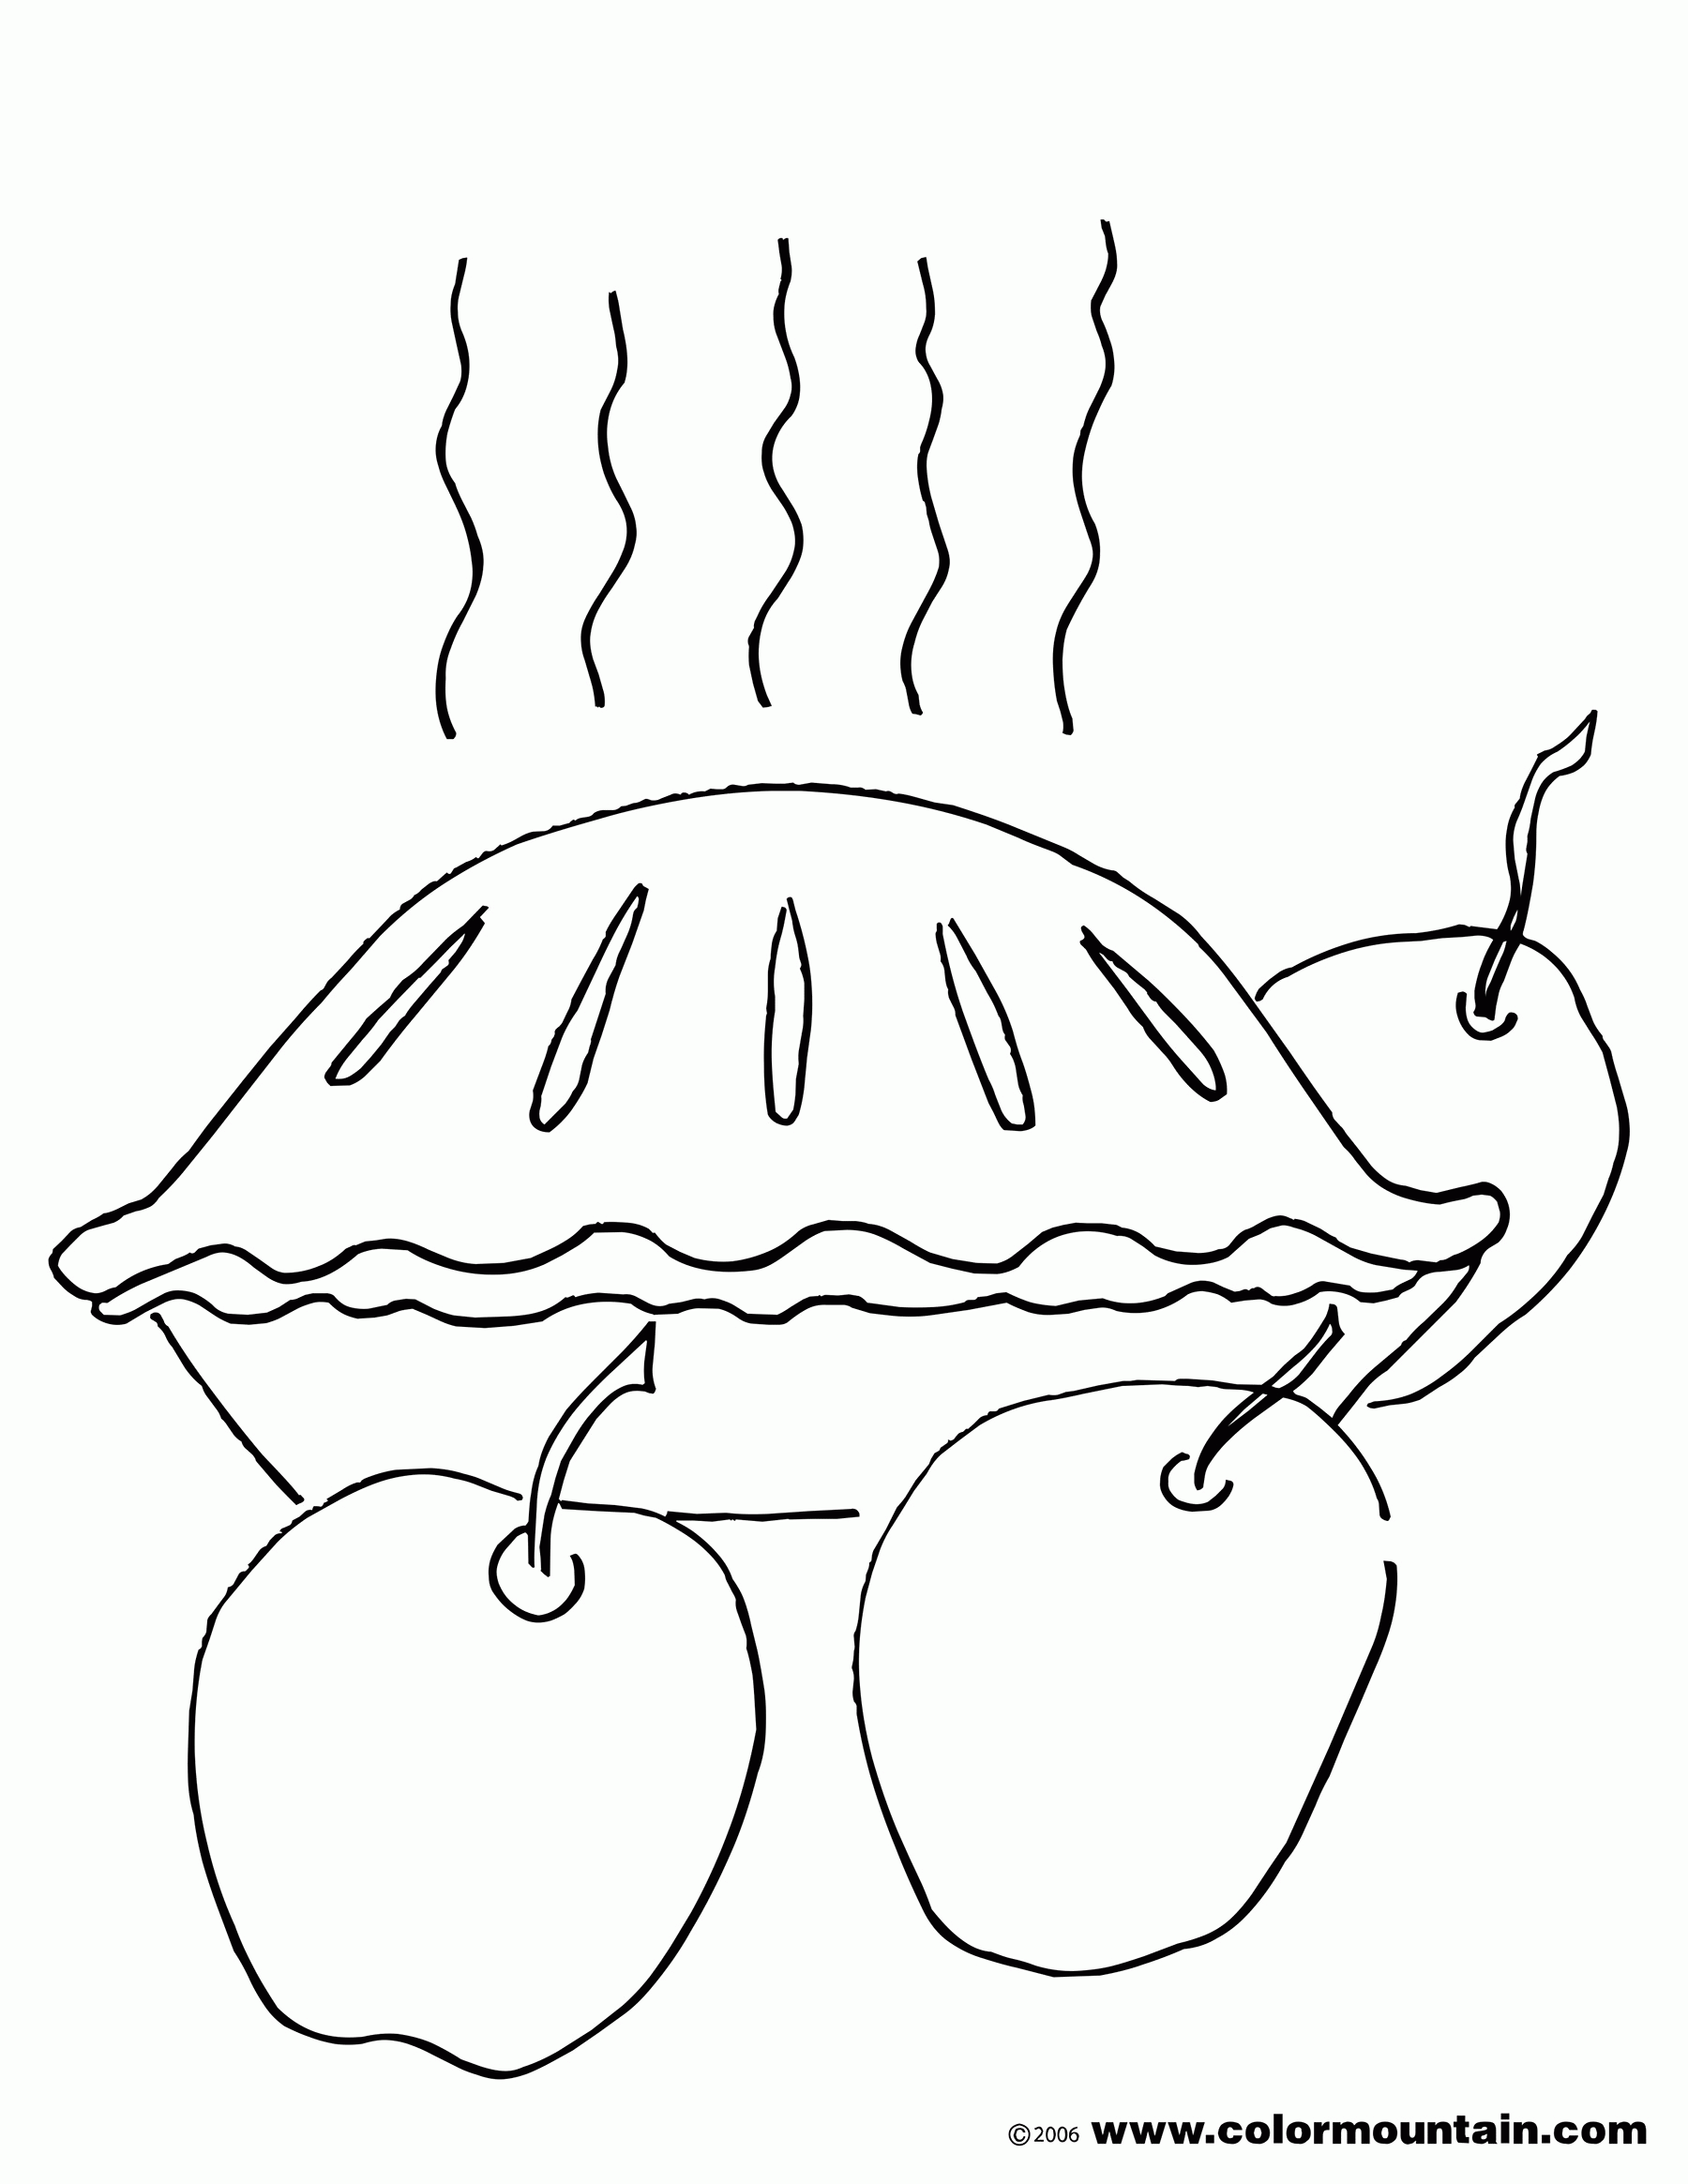 Apple Pie Coloring Pages   Coloring Home